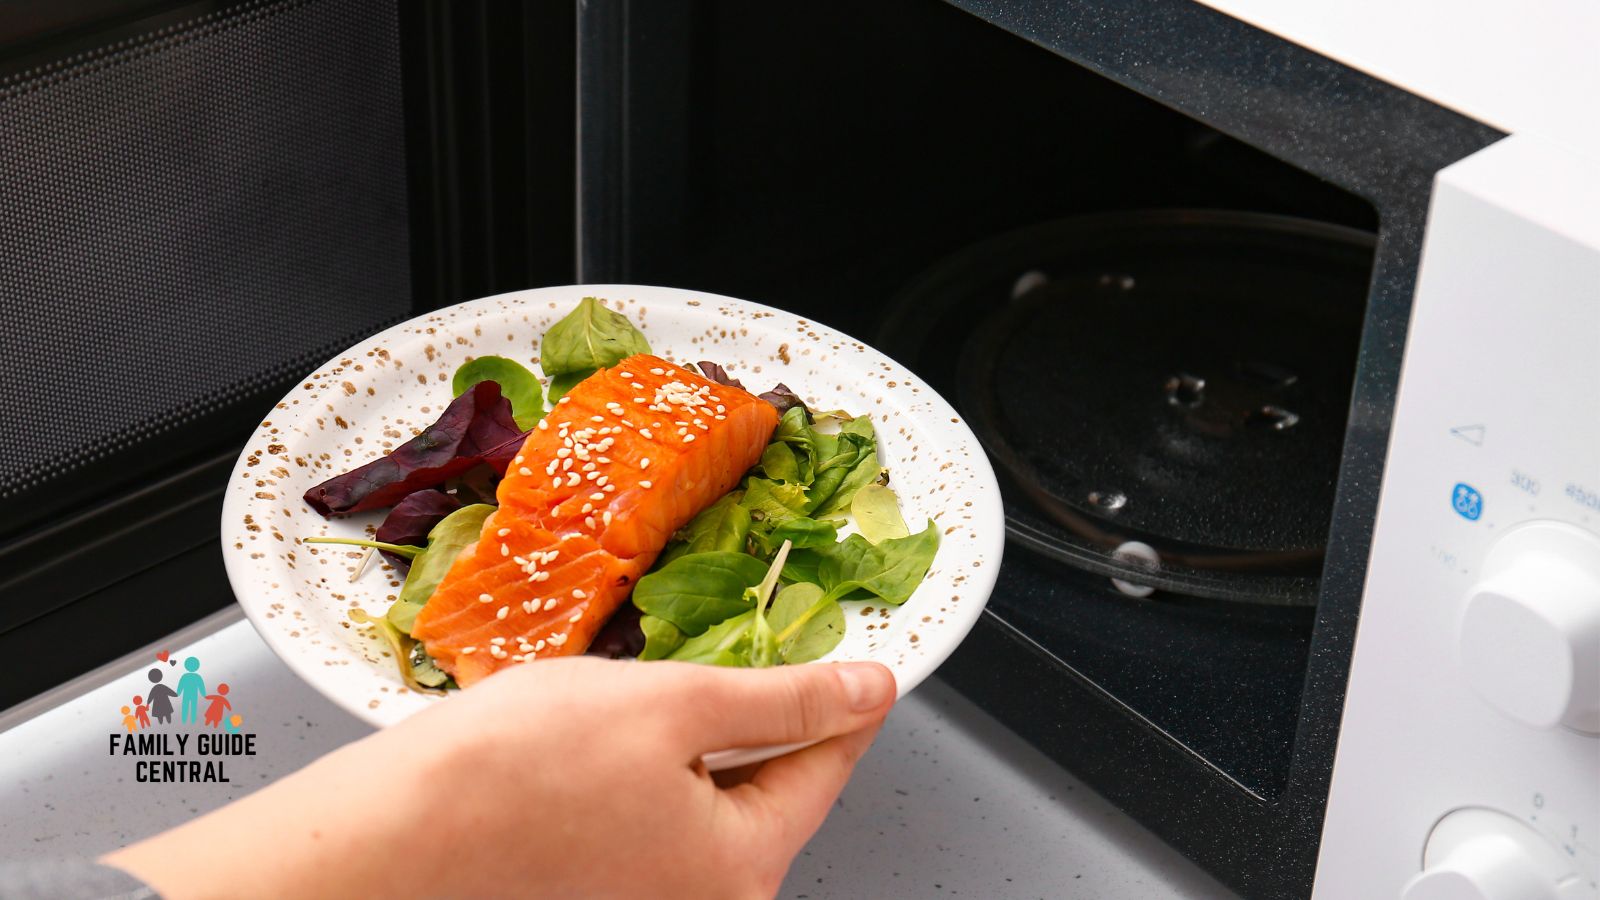 Putting fish into a microwave - familyguidecentral.com